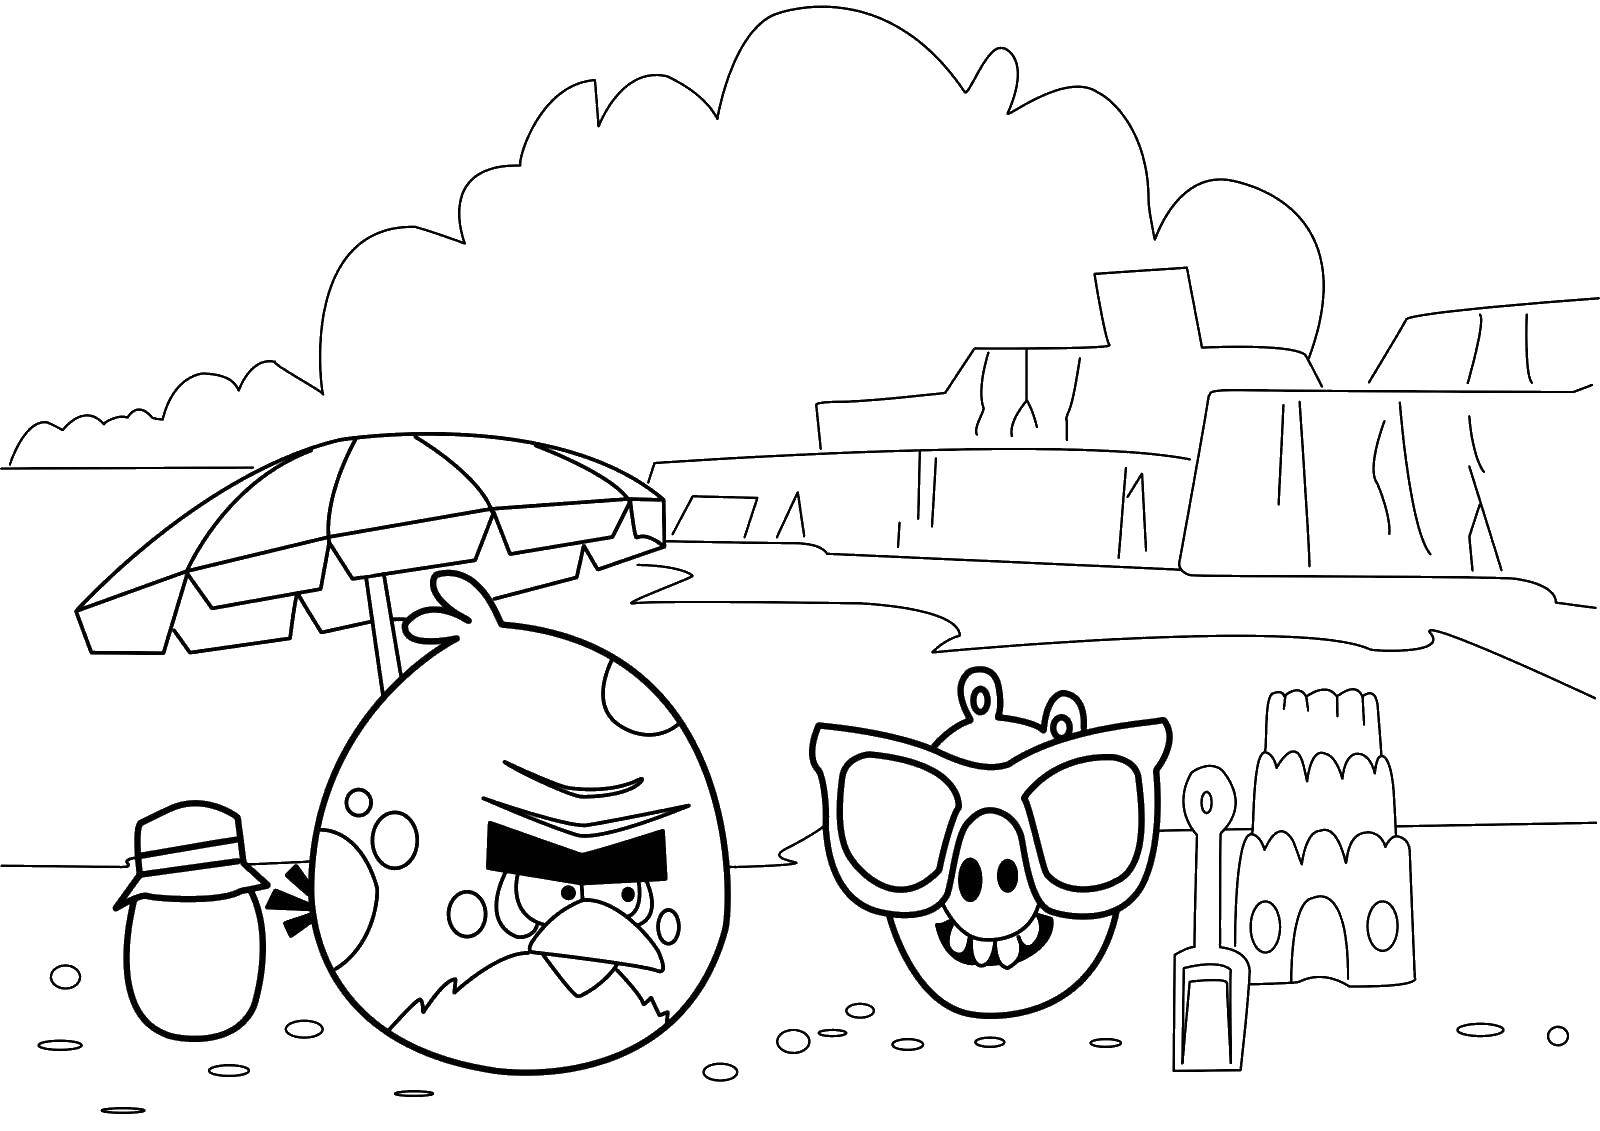 Coloring The bird and the pig on the beach. Category angry birds. Tags:  Games, Angry Birds .